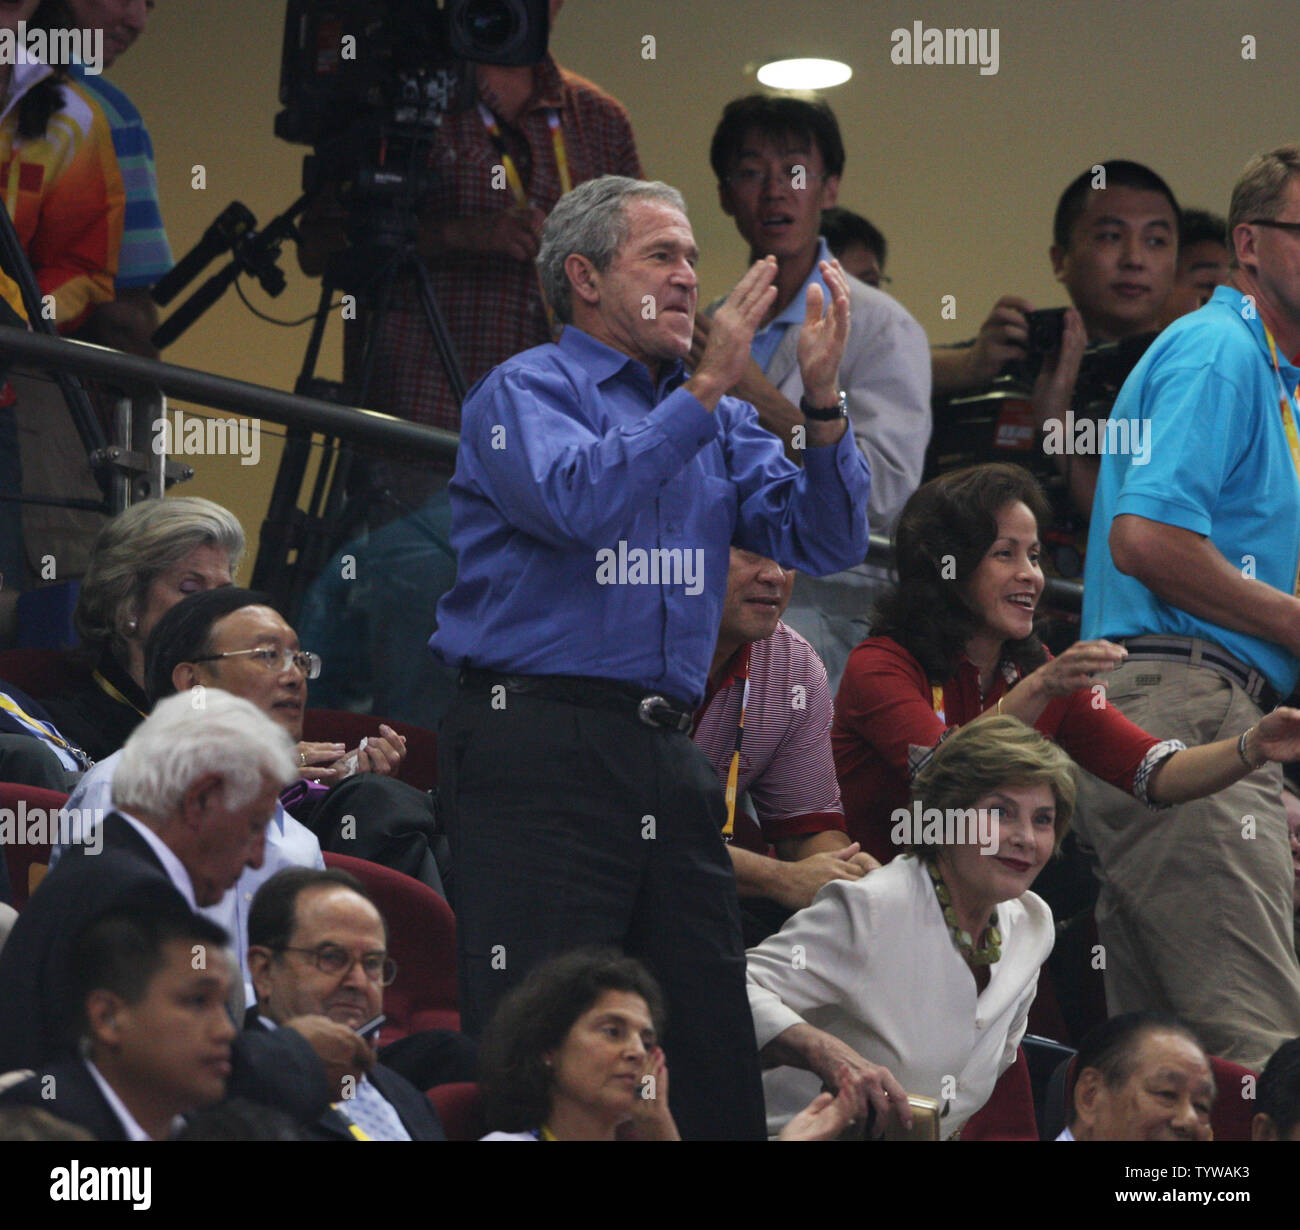 President George Bush applaud and whistles as the USA basketball team enters to play China at the 2008 Olympics in Beijing on August 10, 2008.  (UPI Photo/Terry Schmitt) Stock Photo